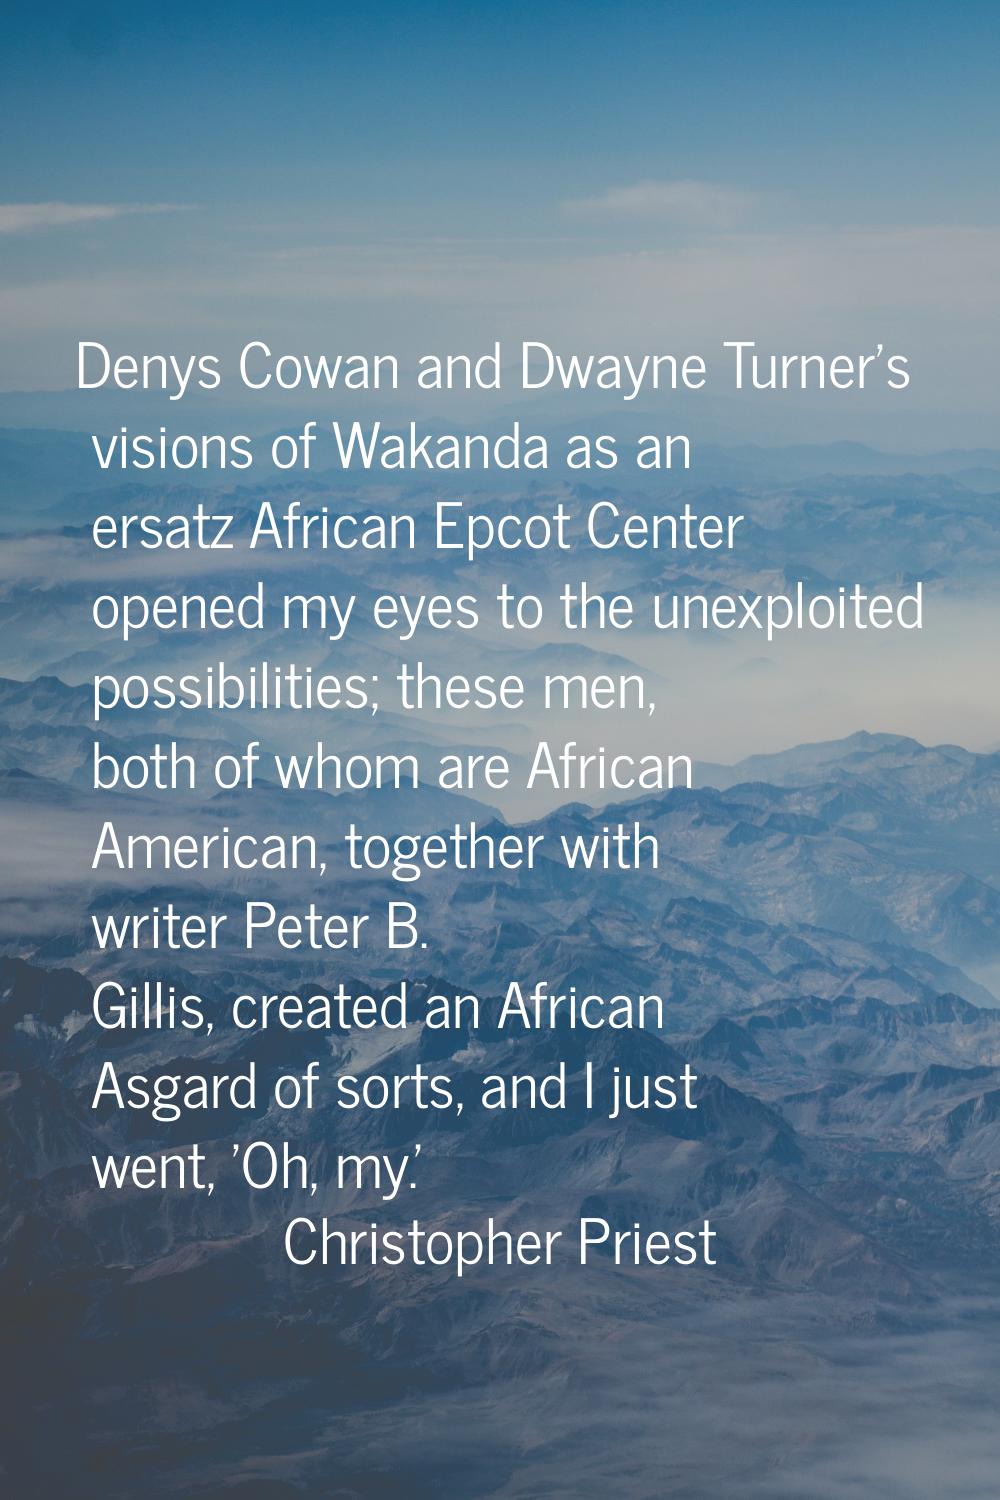 Denys Cowan and Dwayne Turner's visions of Wakanda as an ersatz African Epcot Center opened my eyes